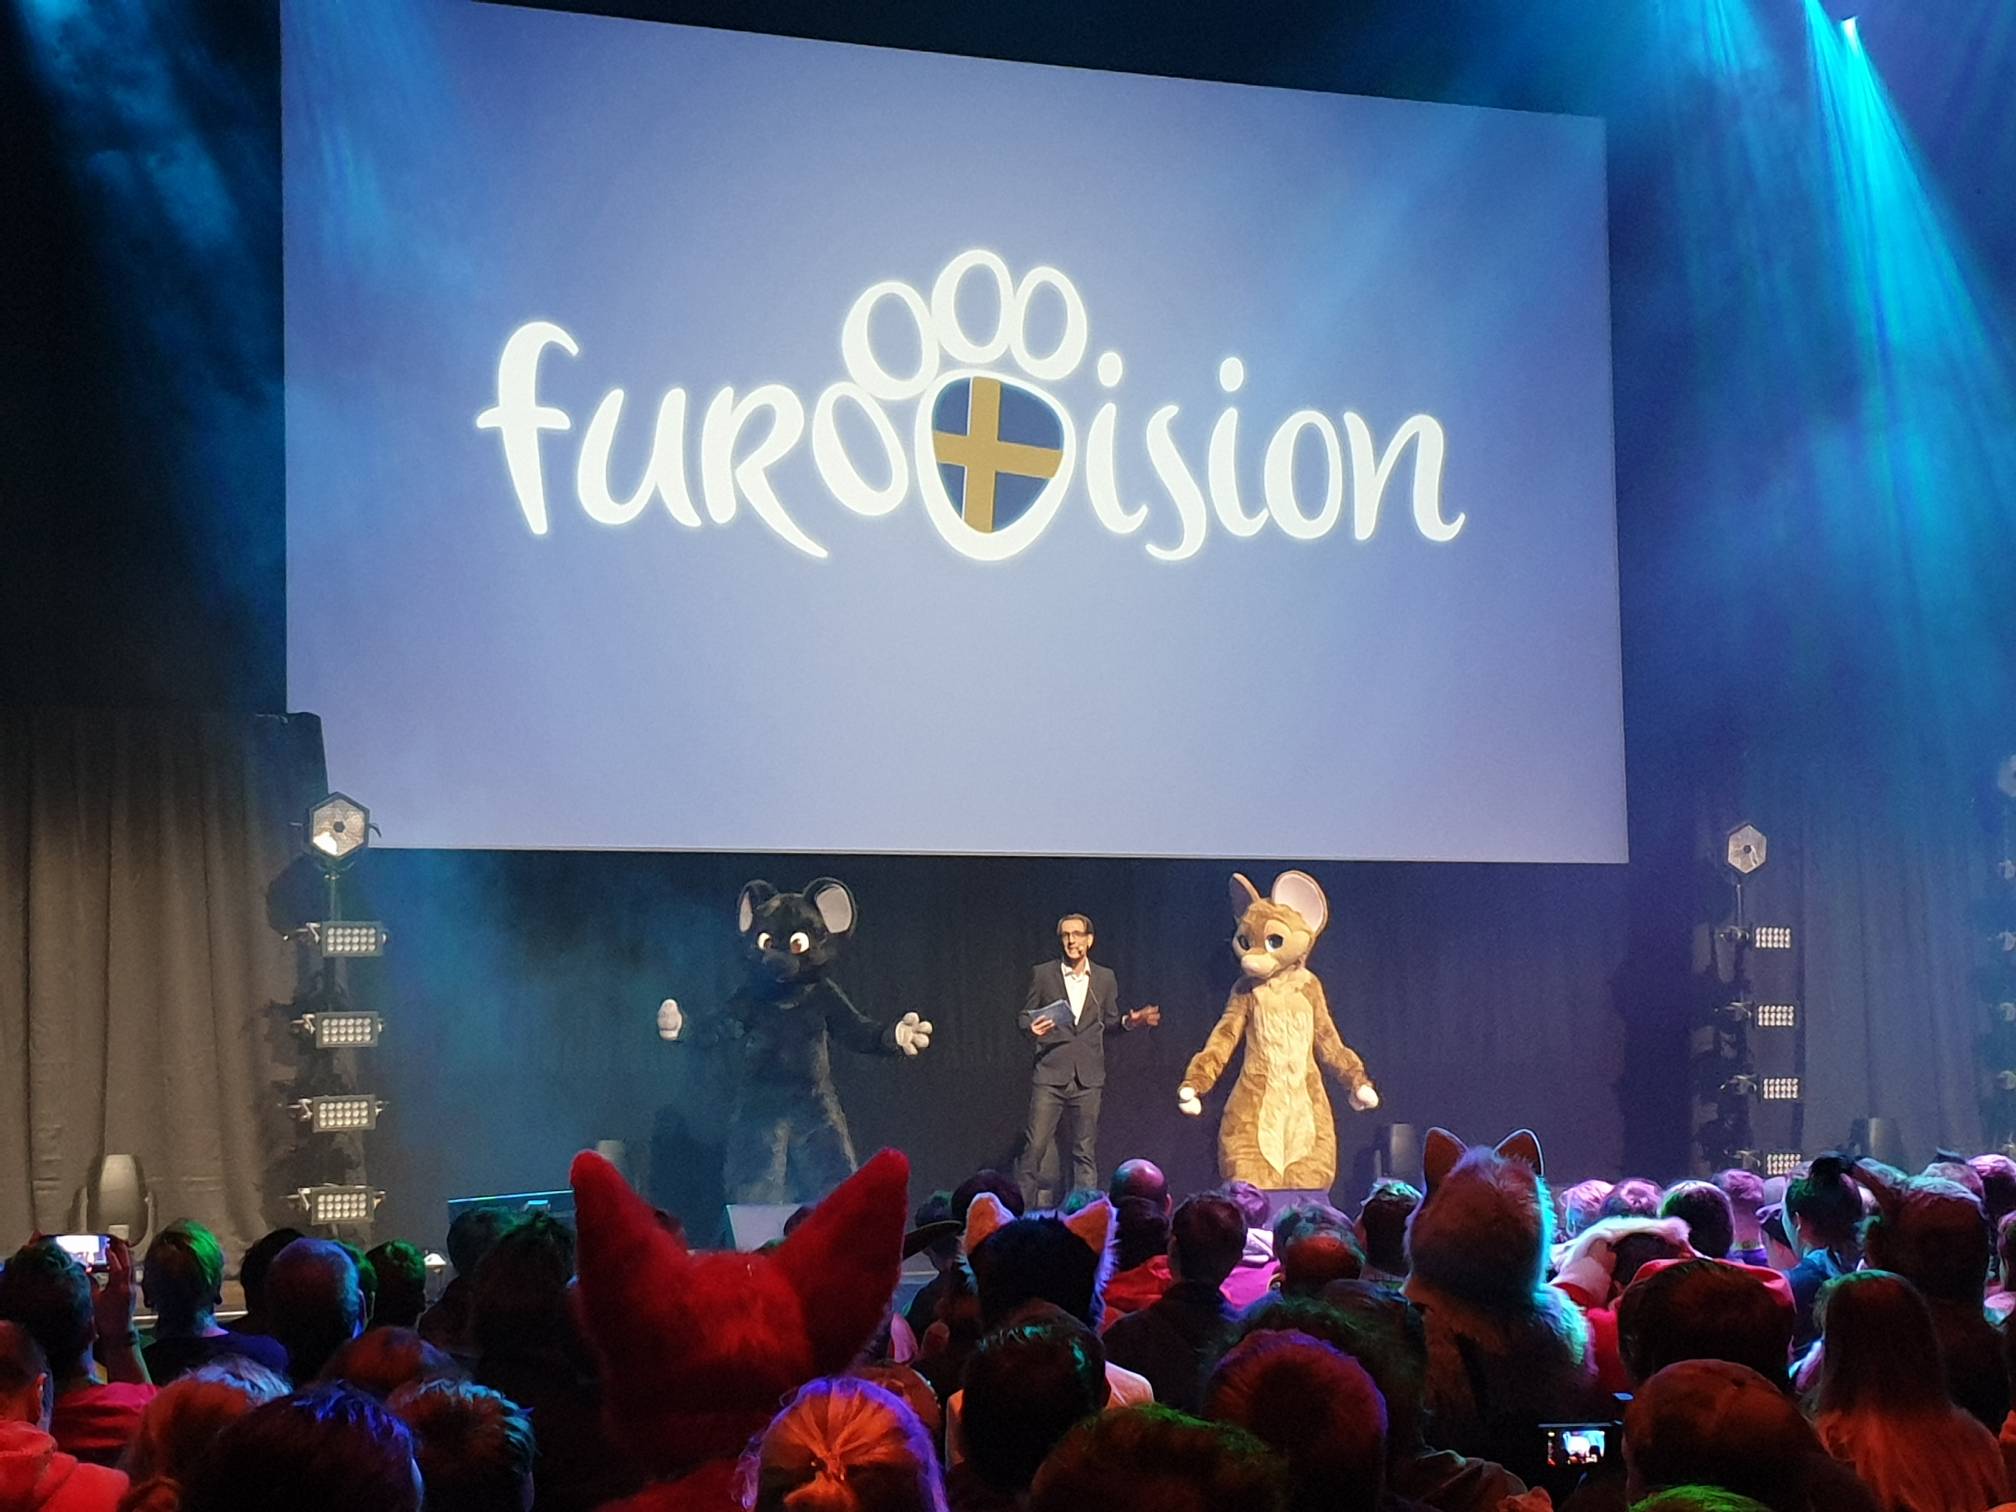 Dalziel on stage as the presenter, with convention mascots Mausie and Iris.